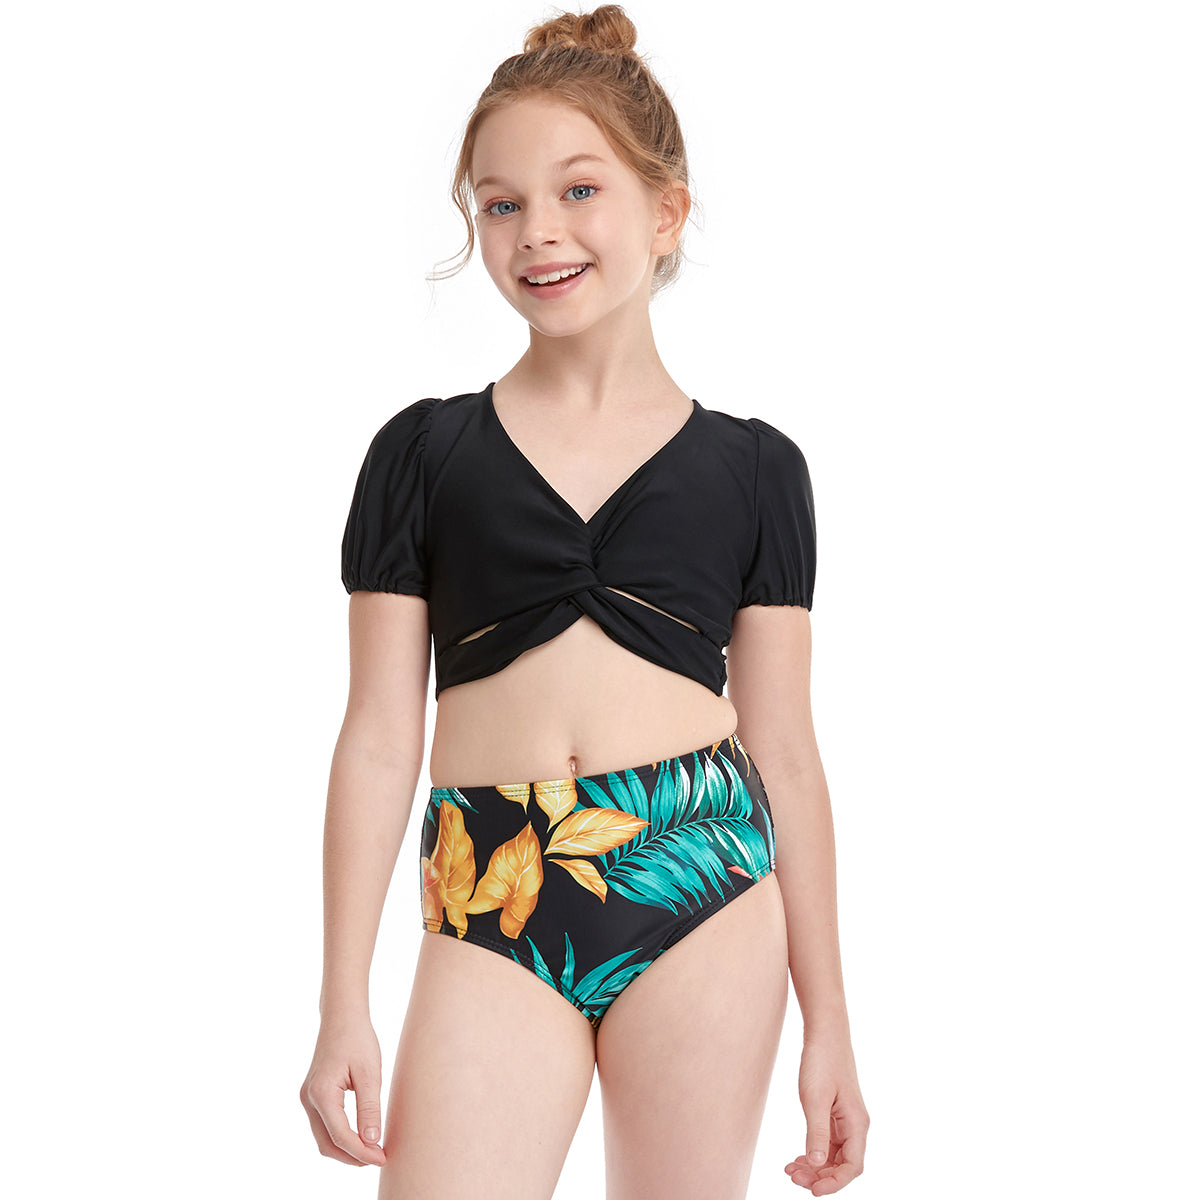 Girls Two Piece bathing suit